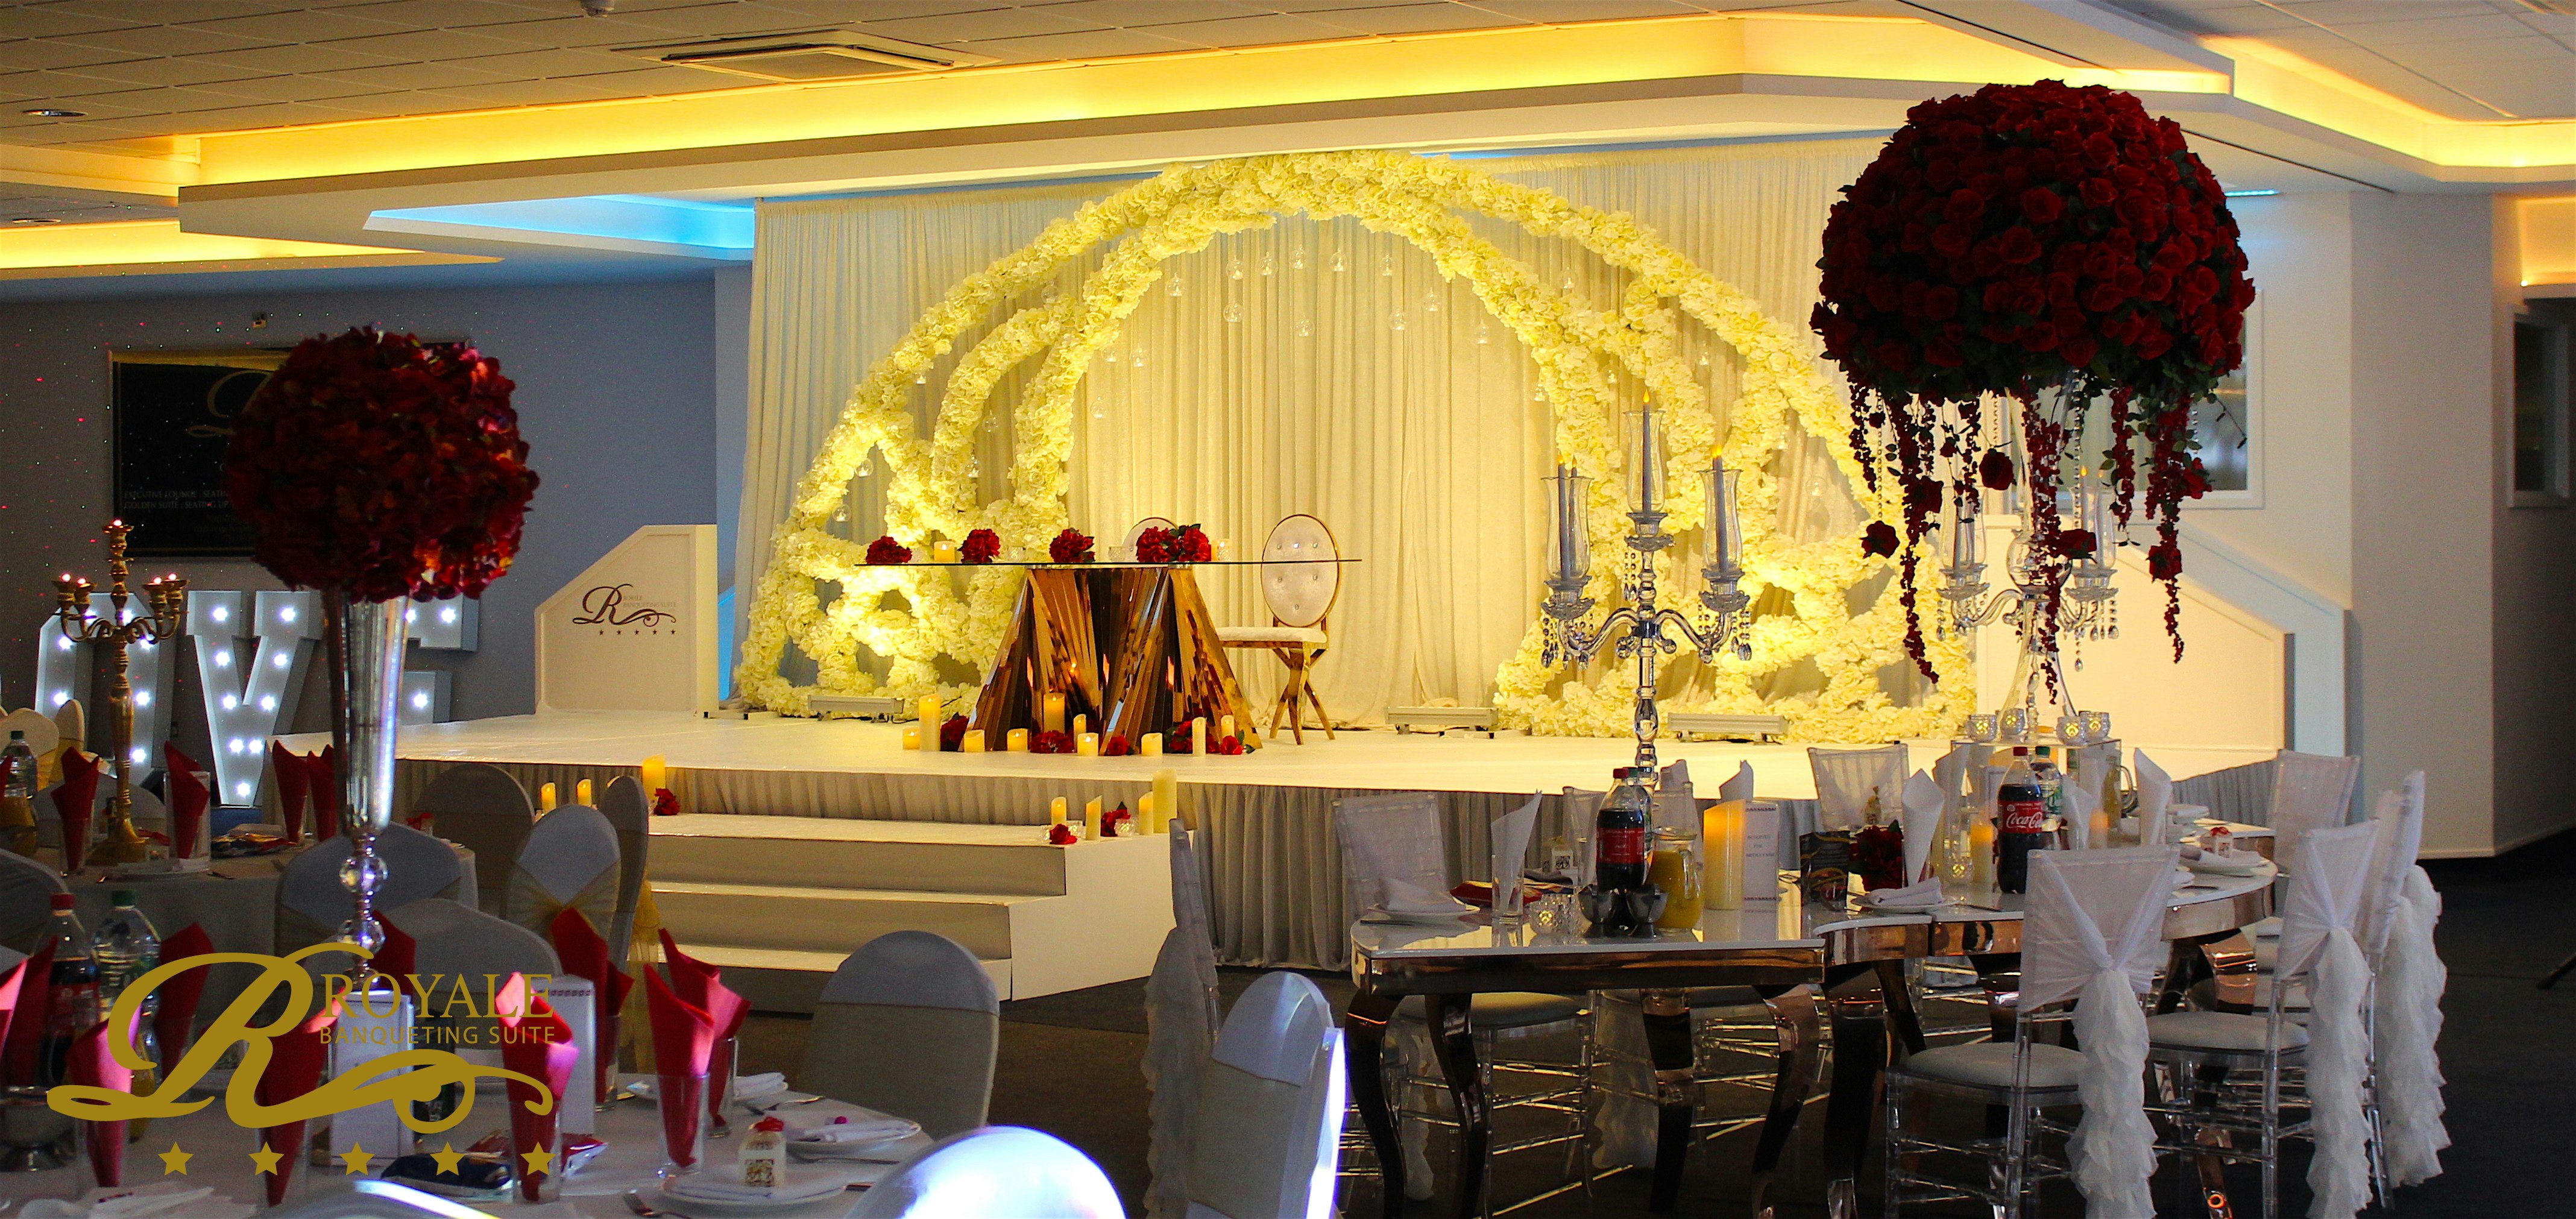 Royale Banqueting Suite  - Main hall image 3